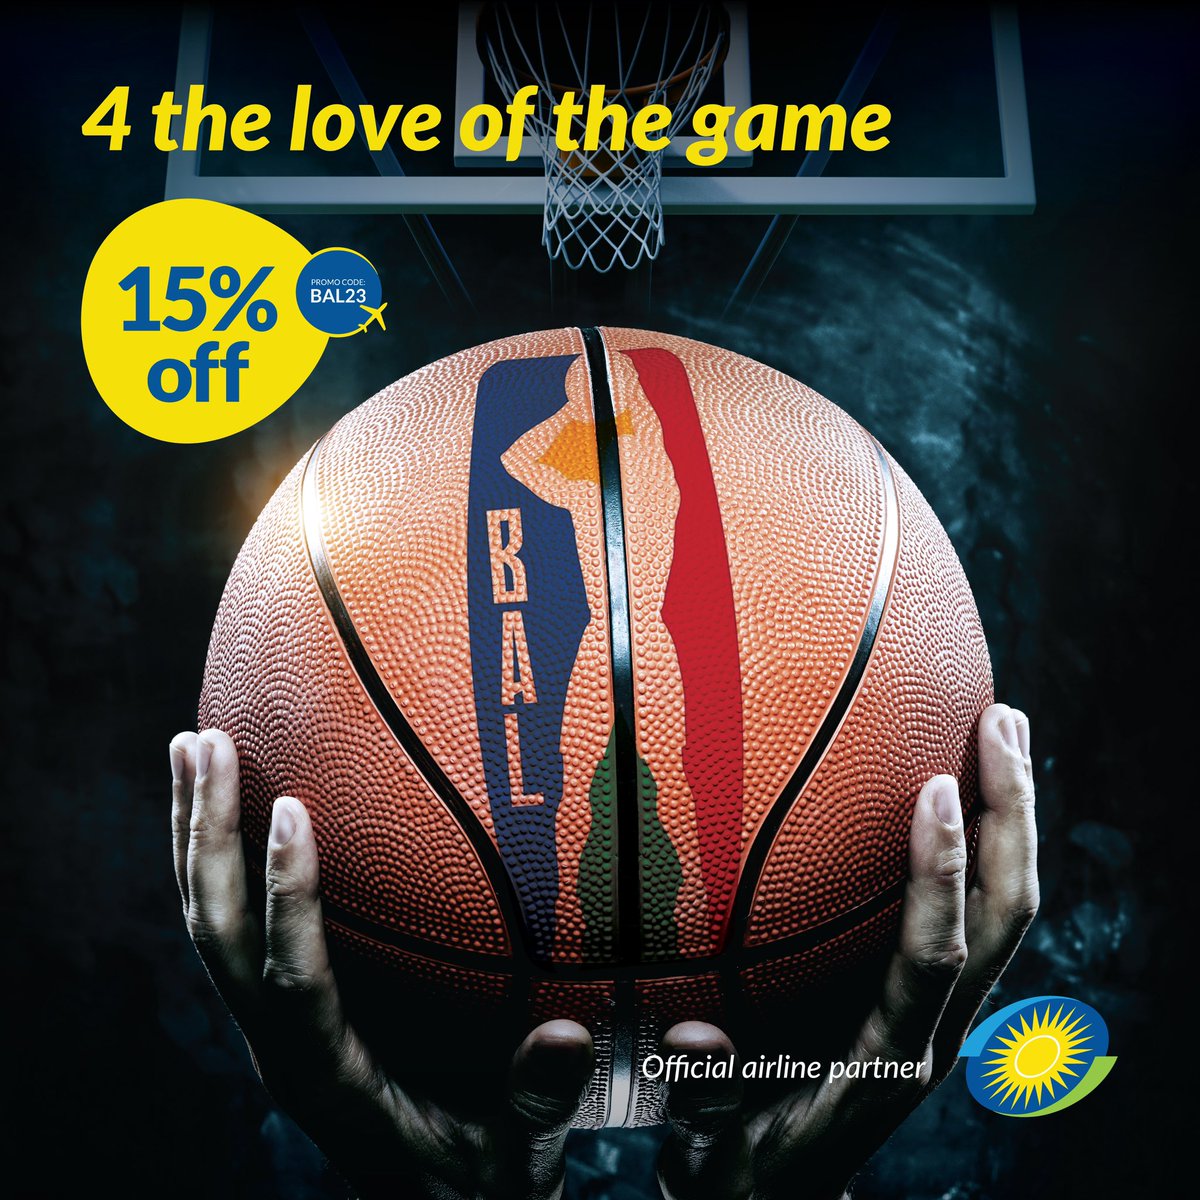 Catch a flight to the biggest basketball show in Africa at a discount. Fly with us to Kigali at a 15% discount and join us courtside for the thrilling #BAL4: bit.ly/15BALdscnt #FlyTheDreamOfAfrica #ProudSponsor